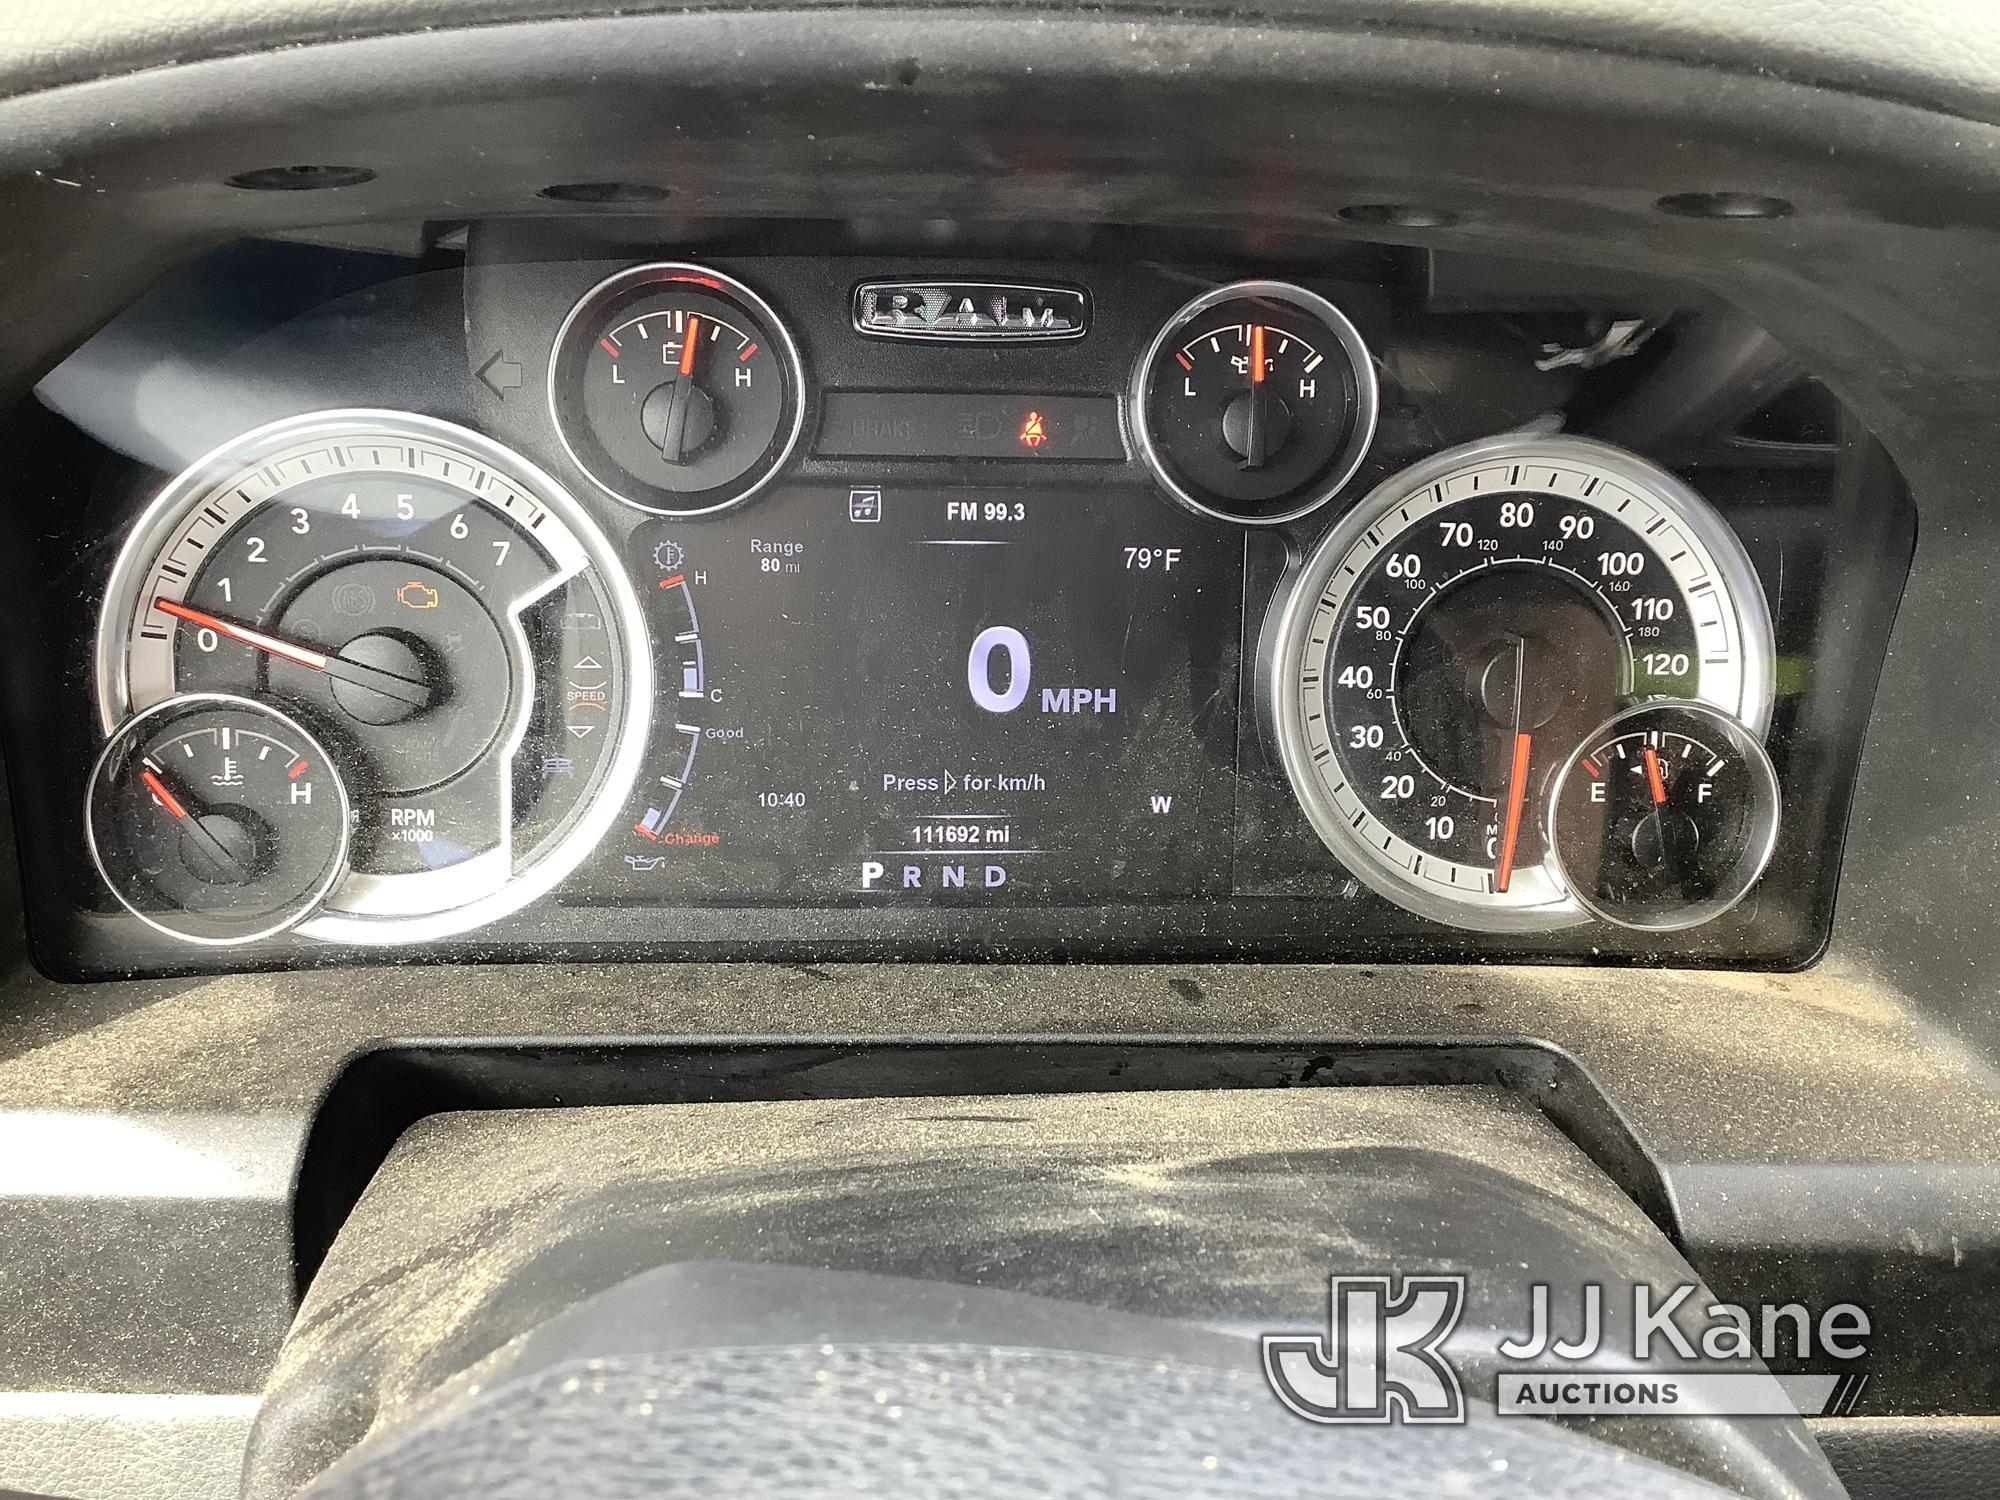 (Smock, PA) 2017 RAM 1500 4x4 Crew-Cab Pickup Truck Physical Title Unavailable, 45 Day Electronic Ti